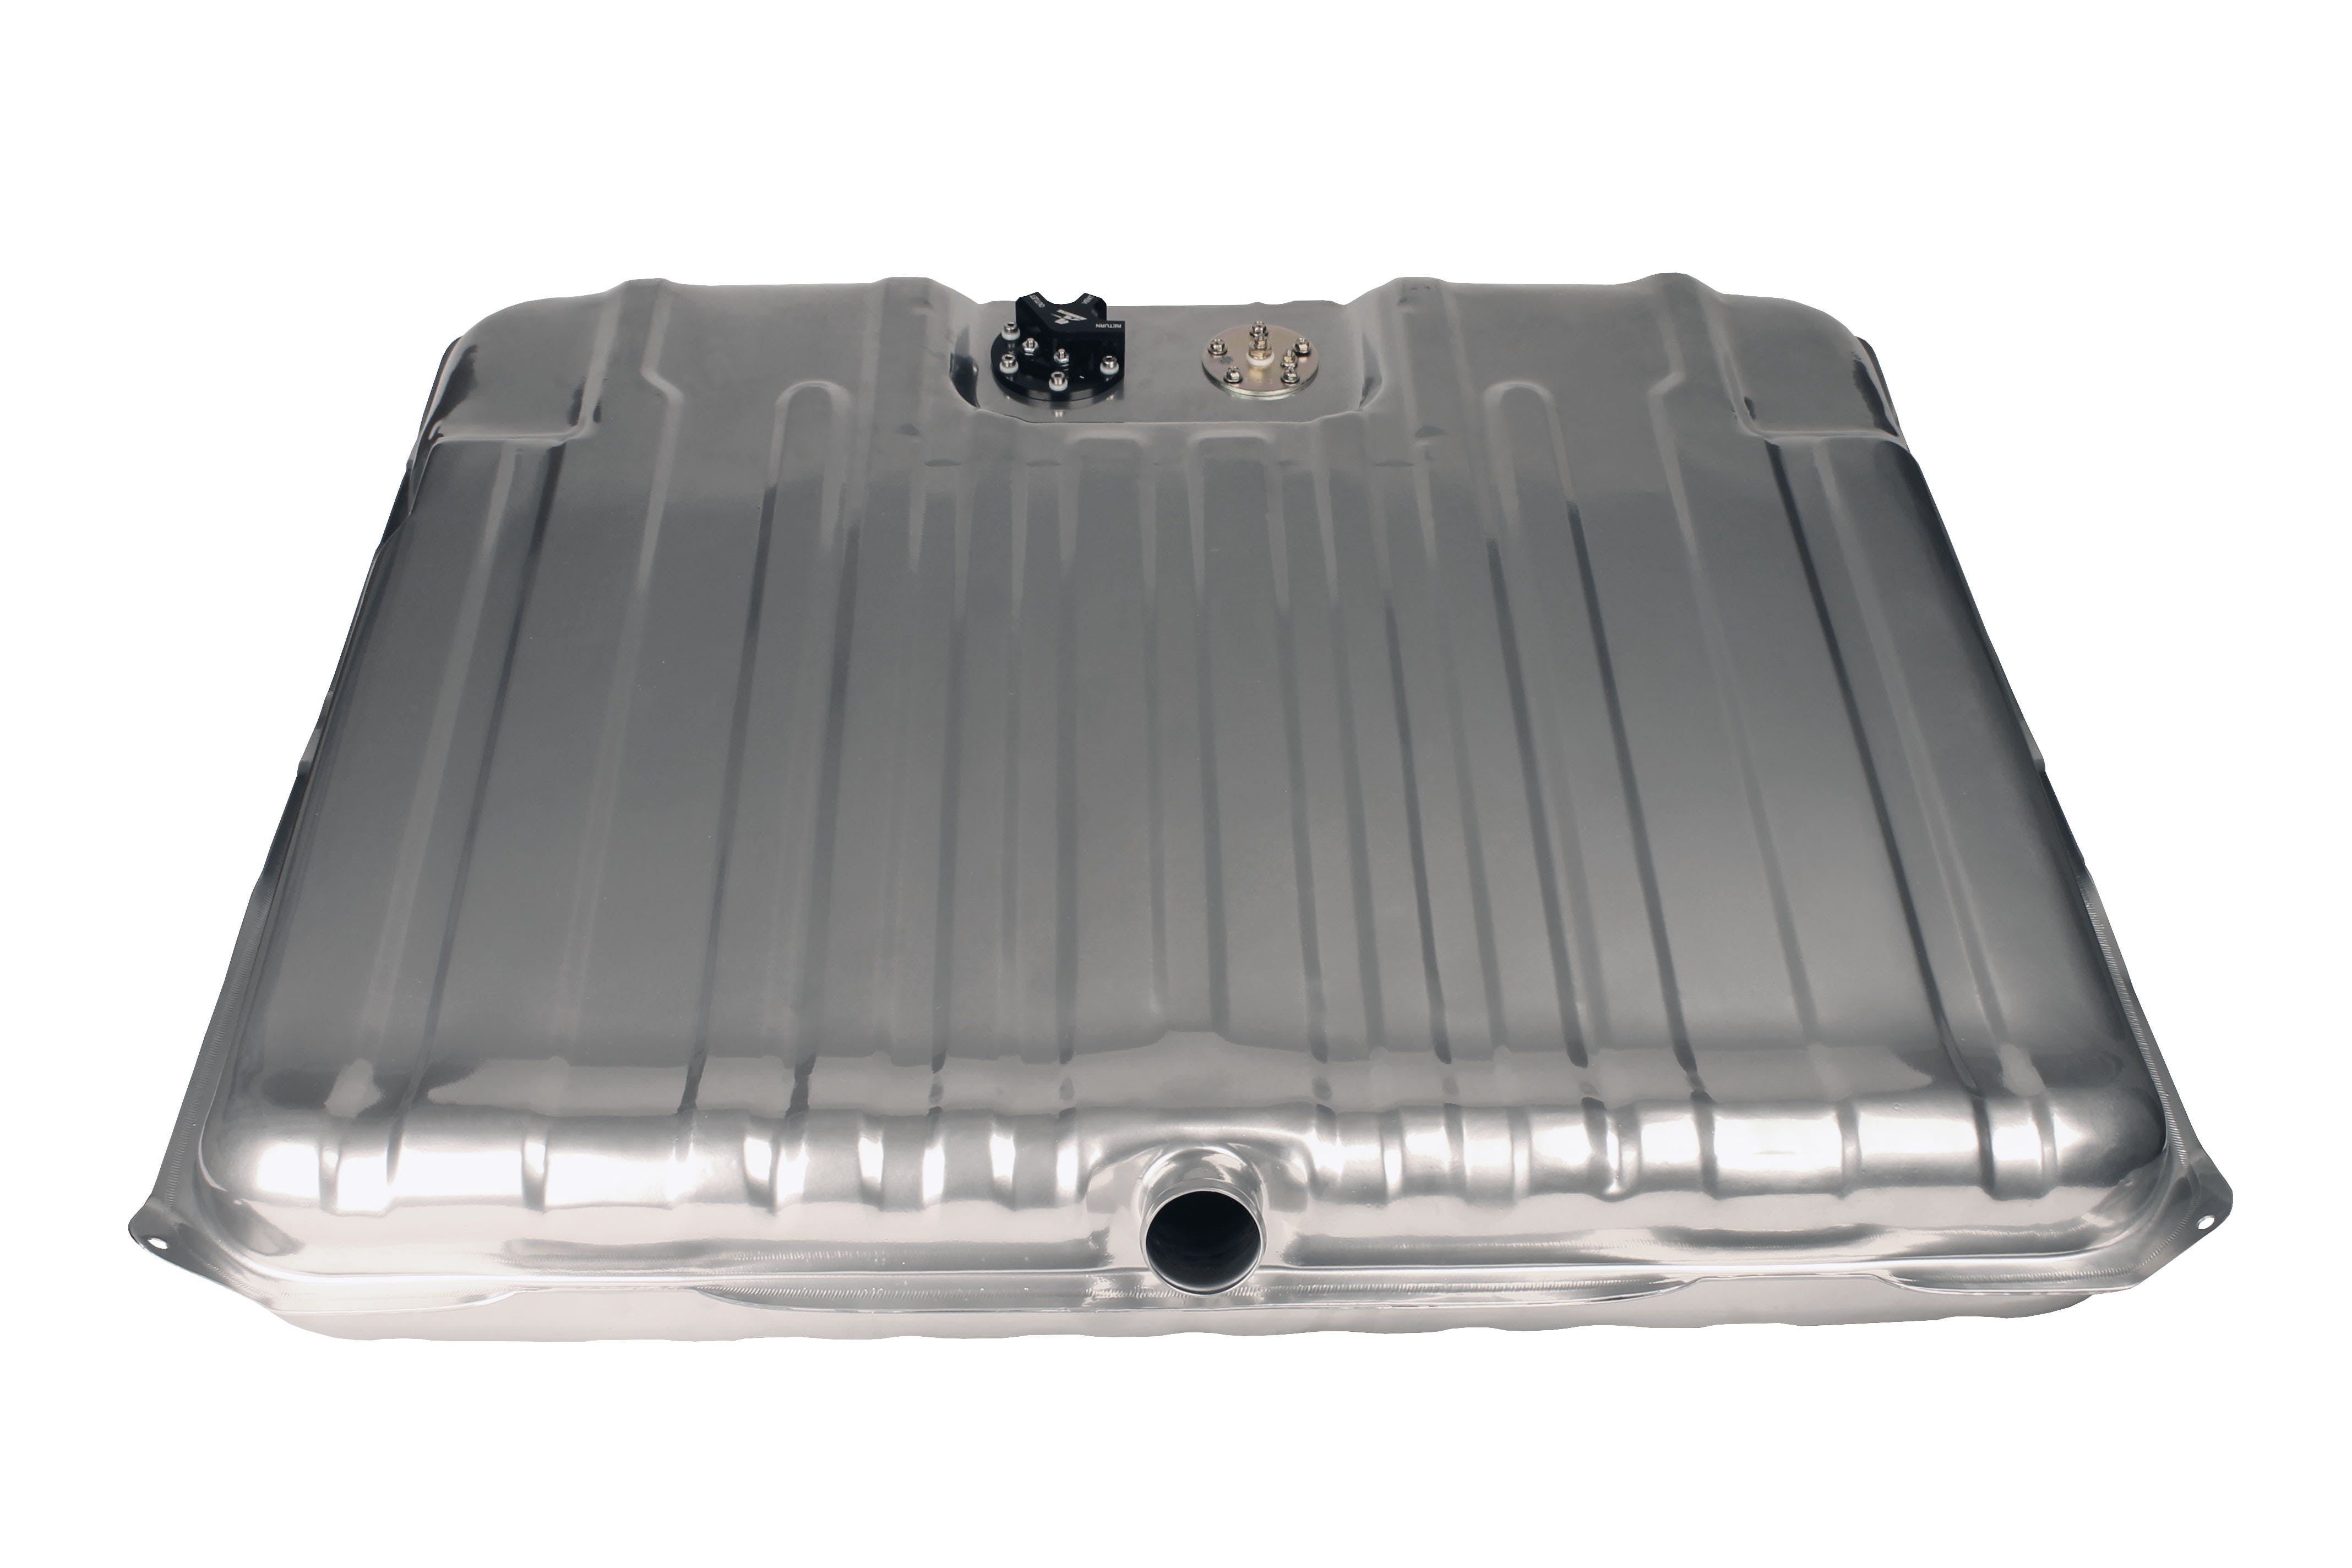 Aeromotive Fuel System 18321 Fuel Tank, 340 Stealth, 65-67 Pontiac GTO and; 66-67 Lemans, 1 inch deeper than OEM